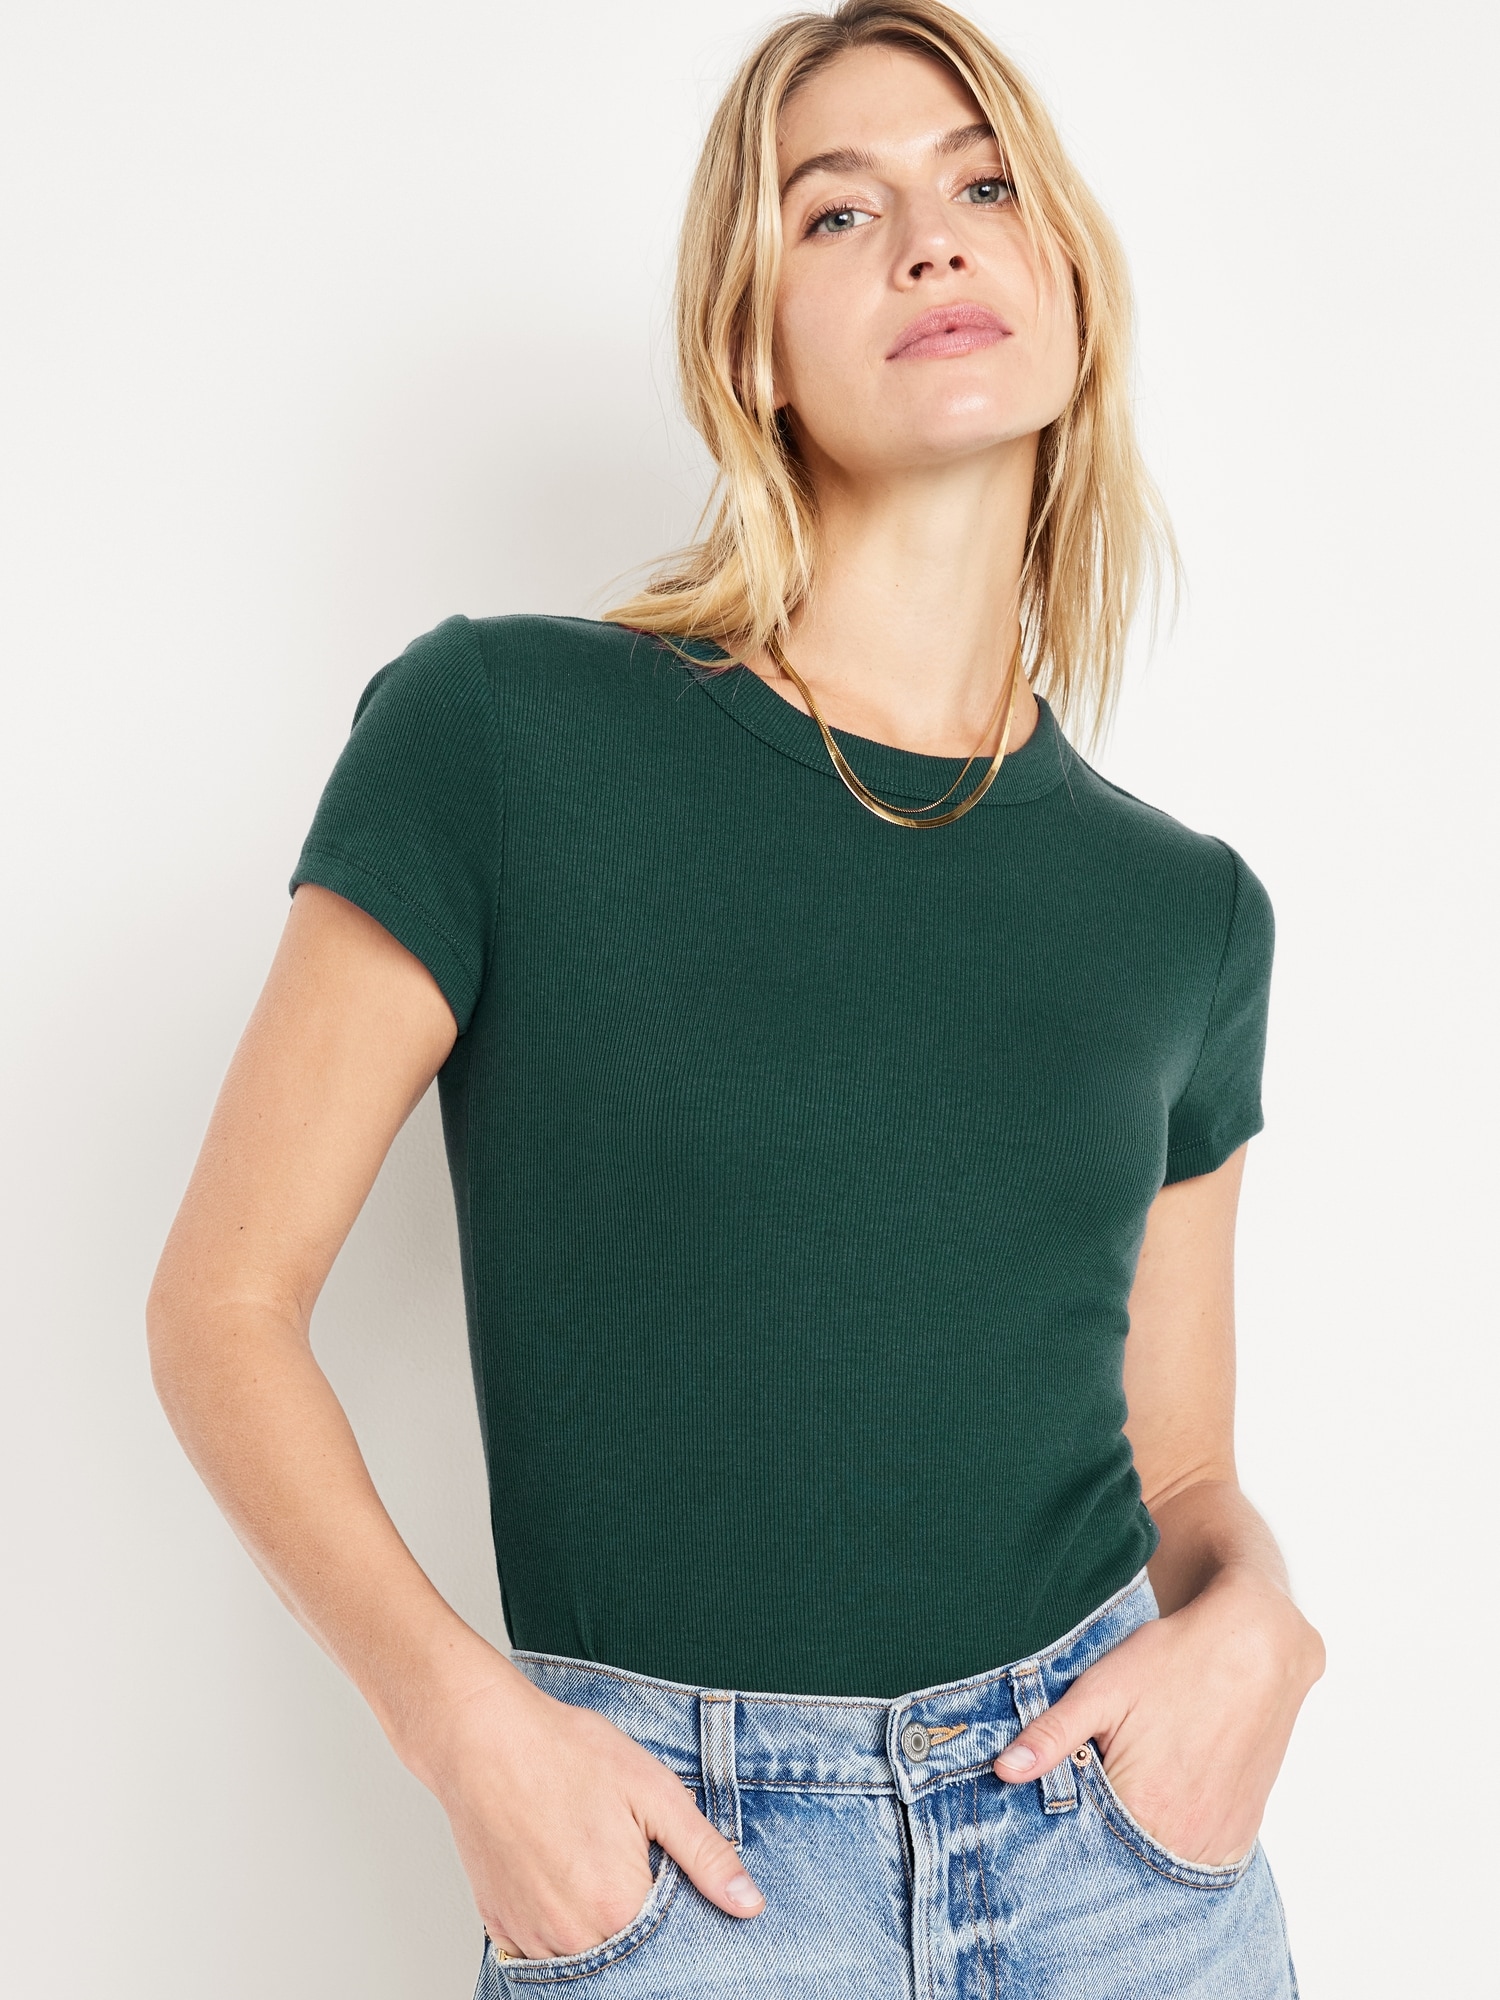 Navy | T-Shirt Women for Cropped Old Snug